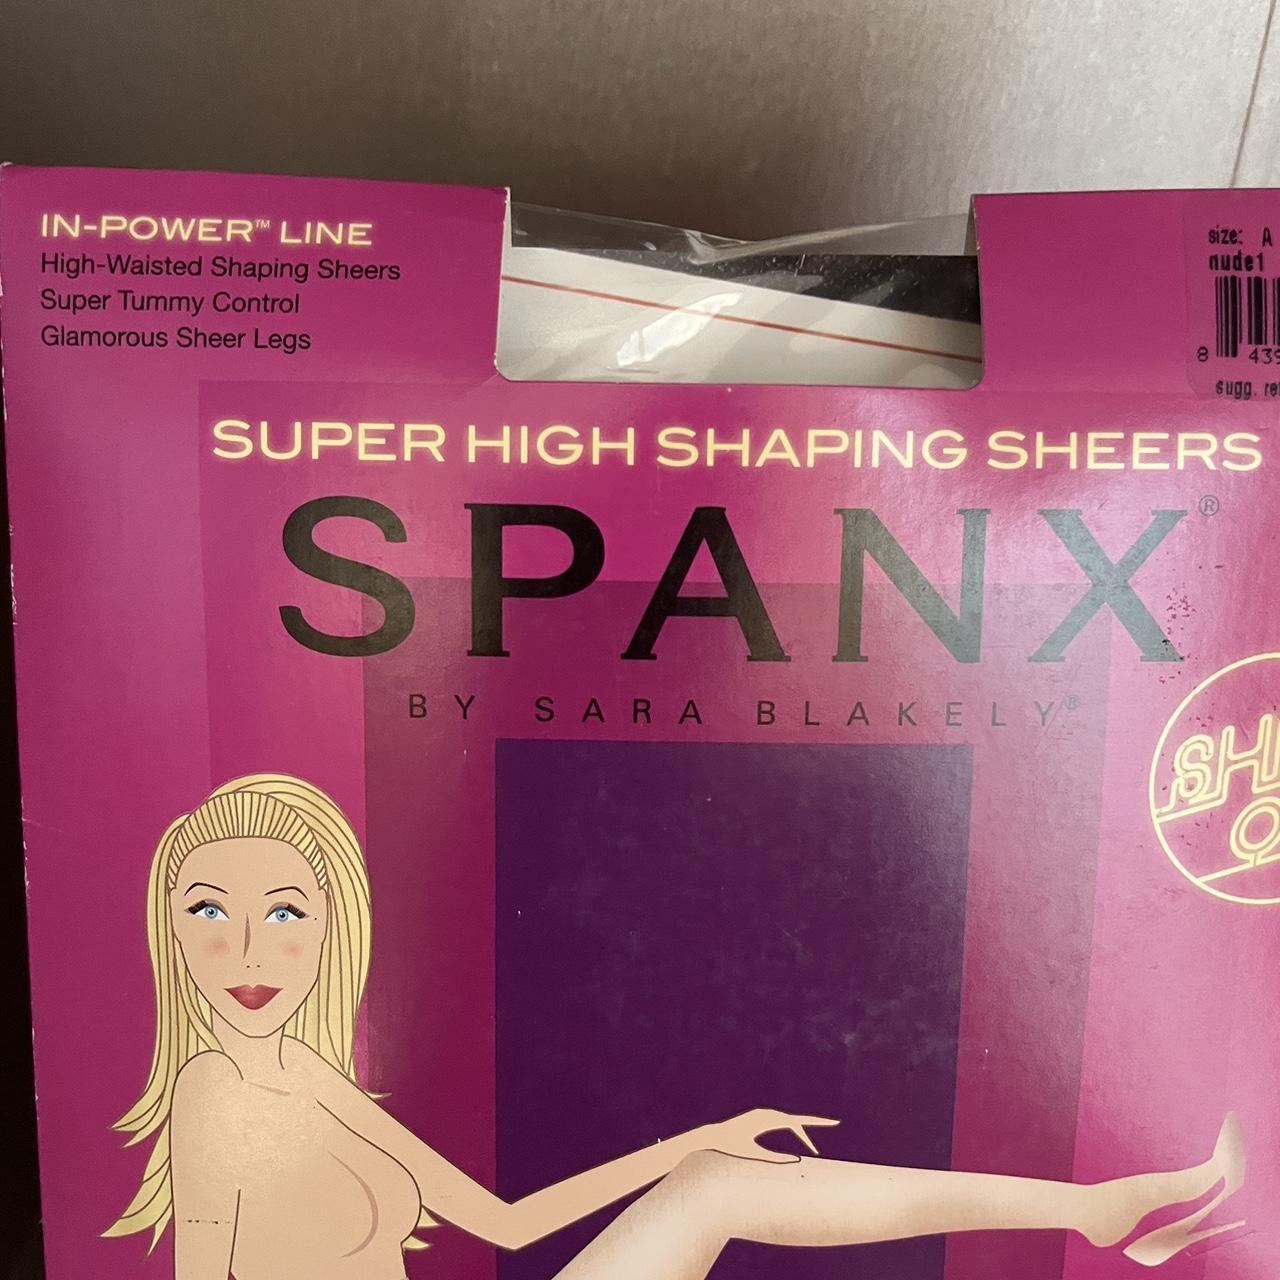 Spanx InPower Line Super Shaping Sheers, Buff, E 